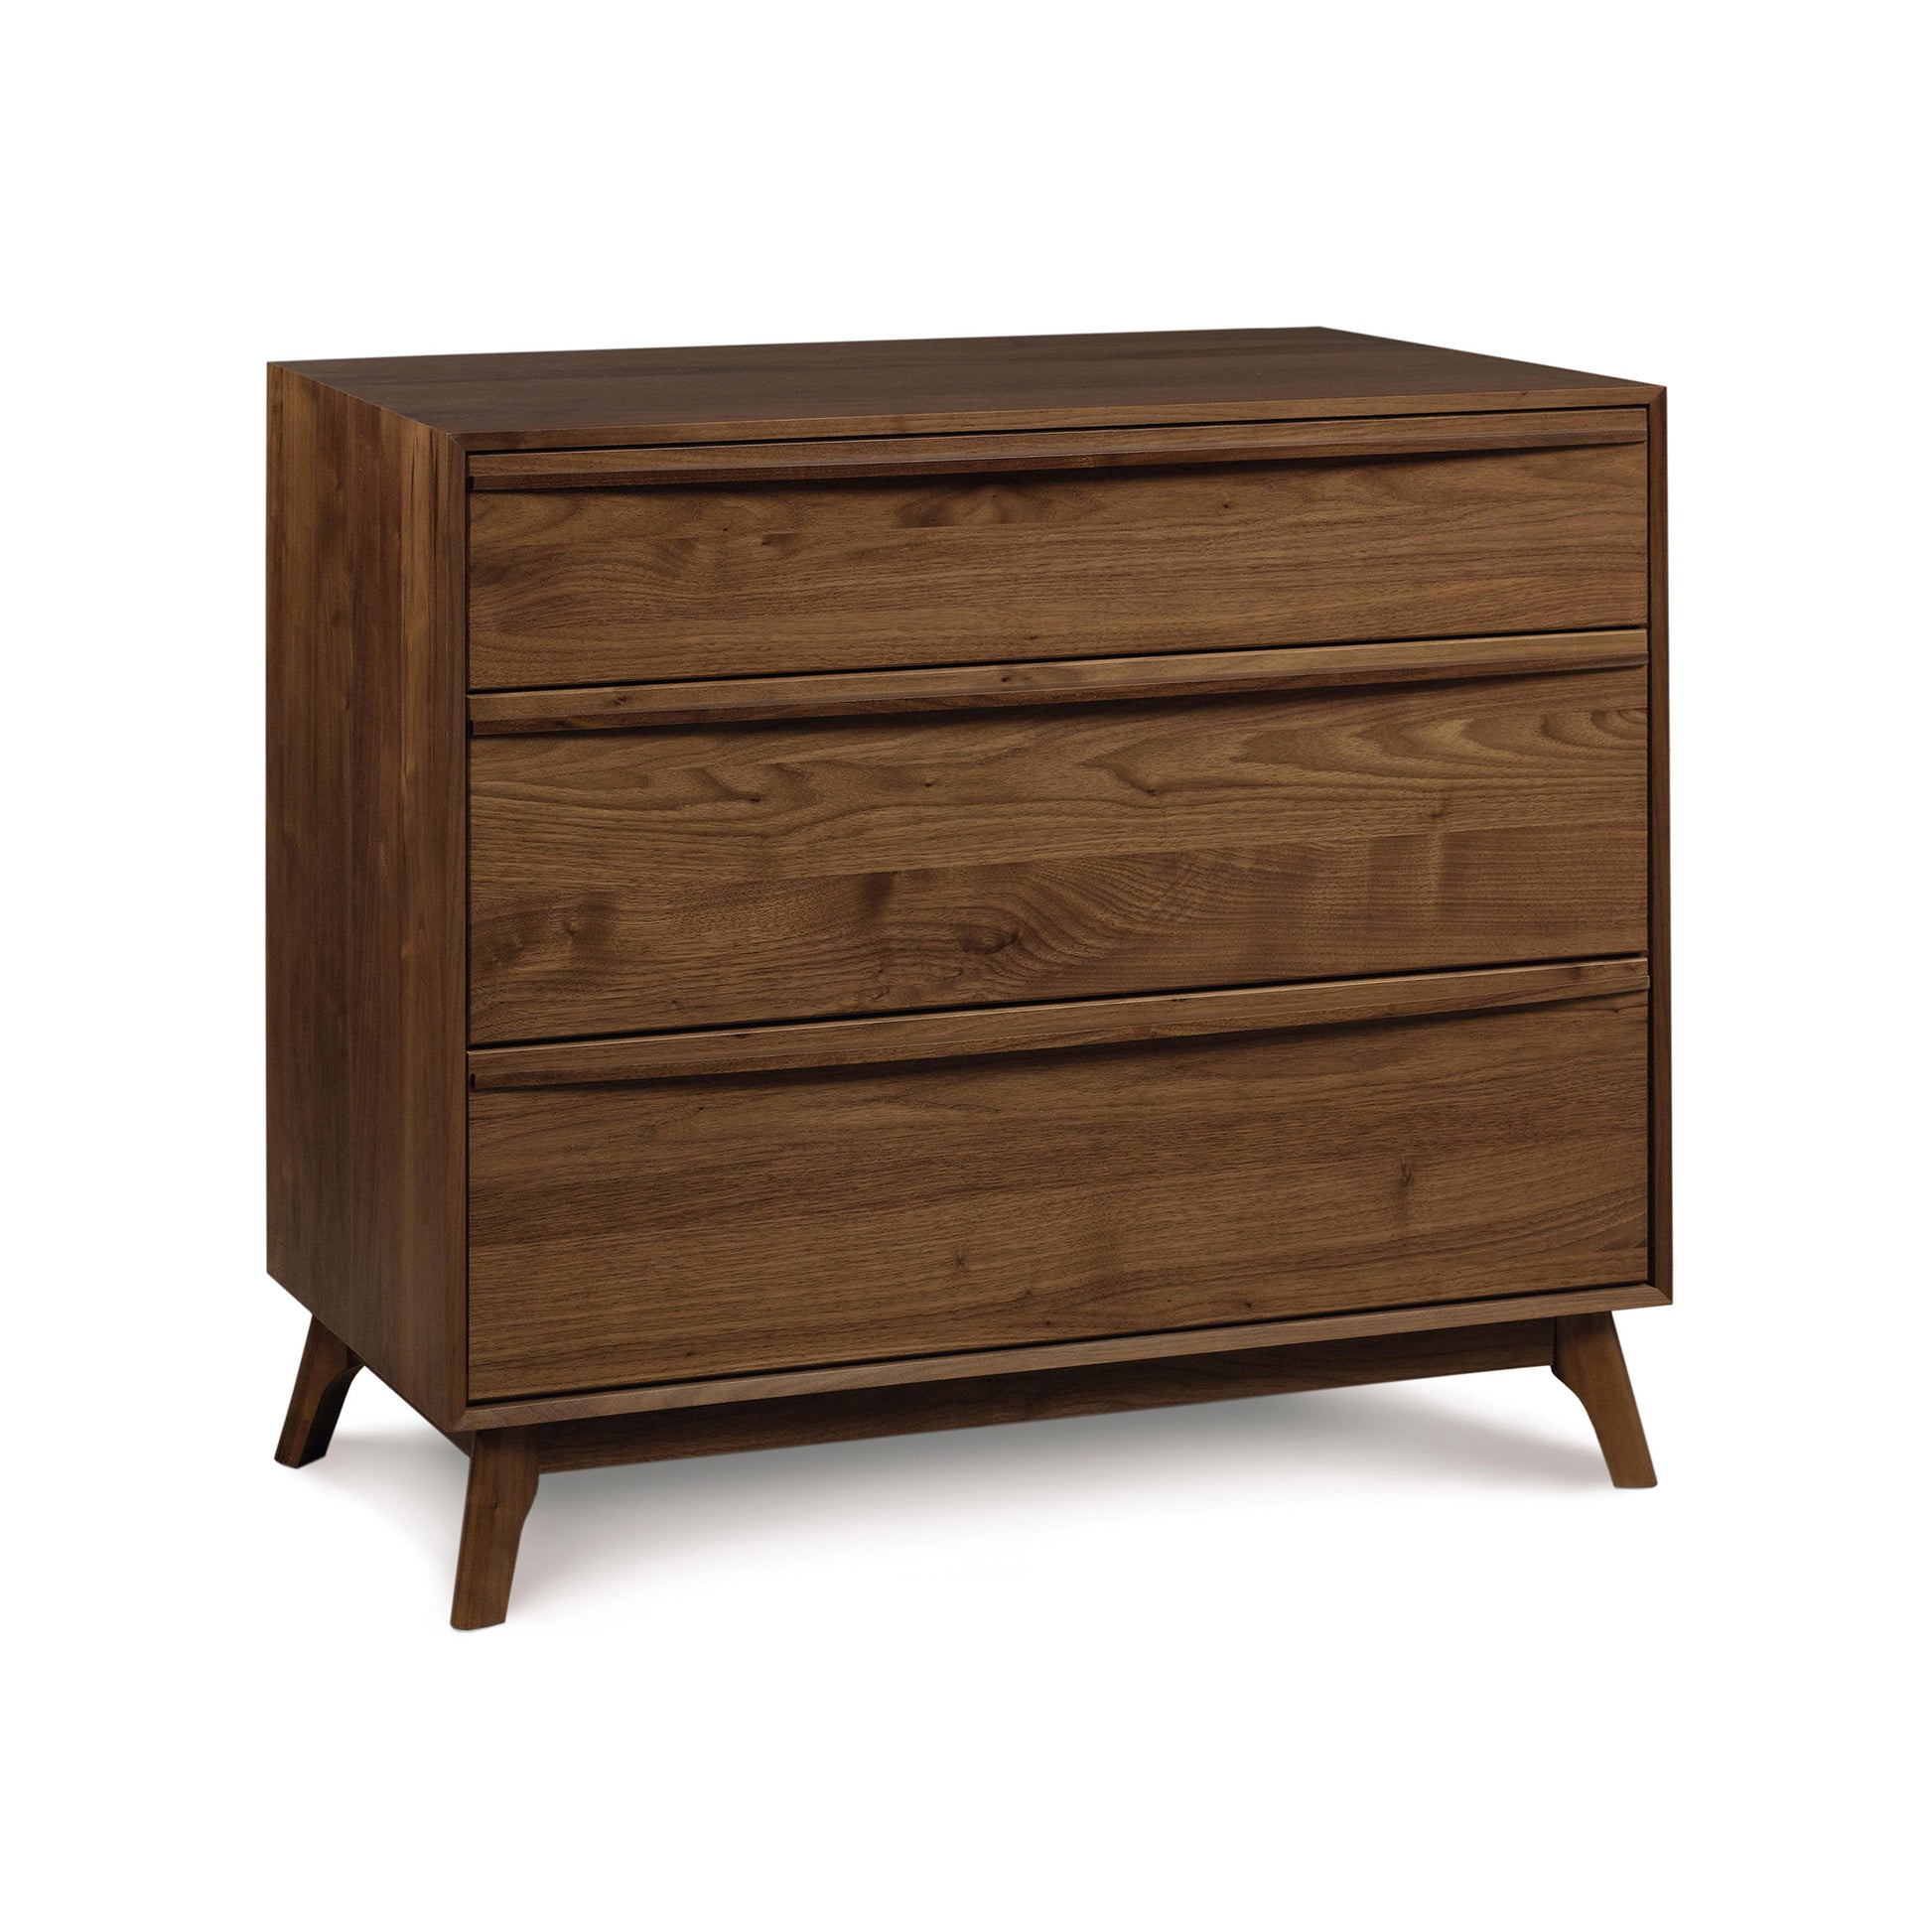 The Copeland Furniture Catalina 3-Drawer Chest is a modern chest of drawers with hardwood legs. It is the perfect addition to any modern bedroom.